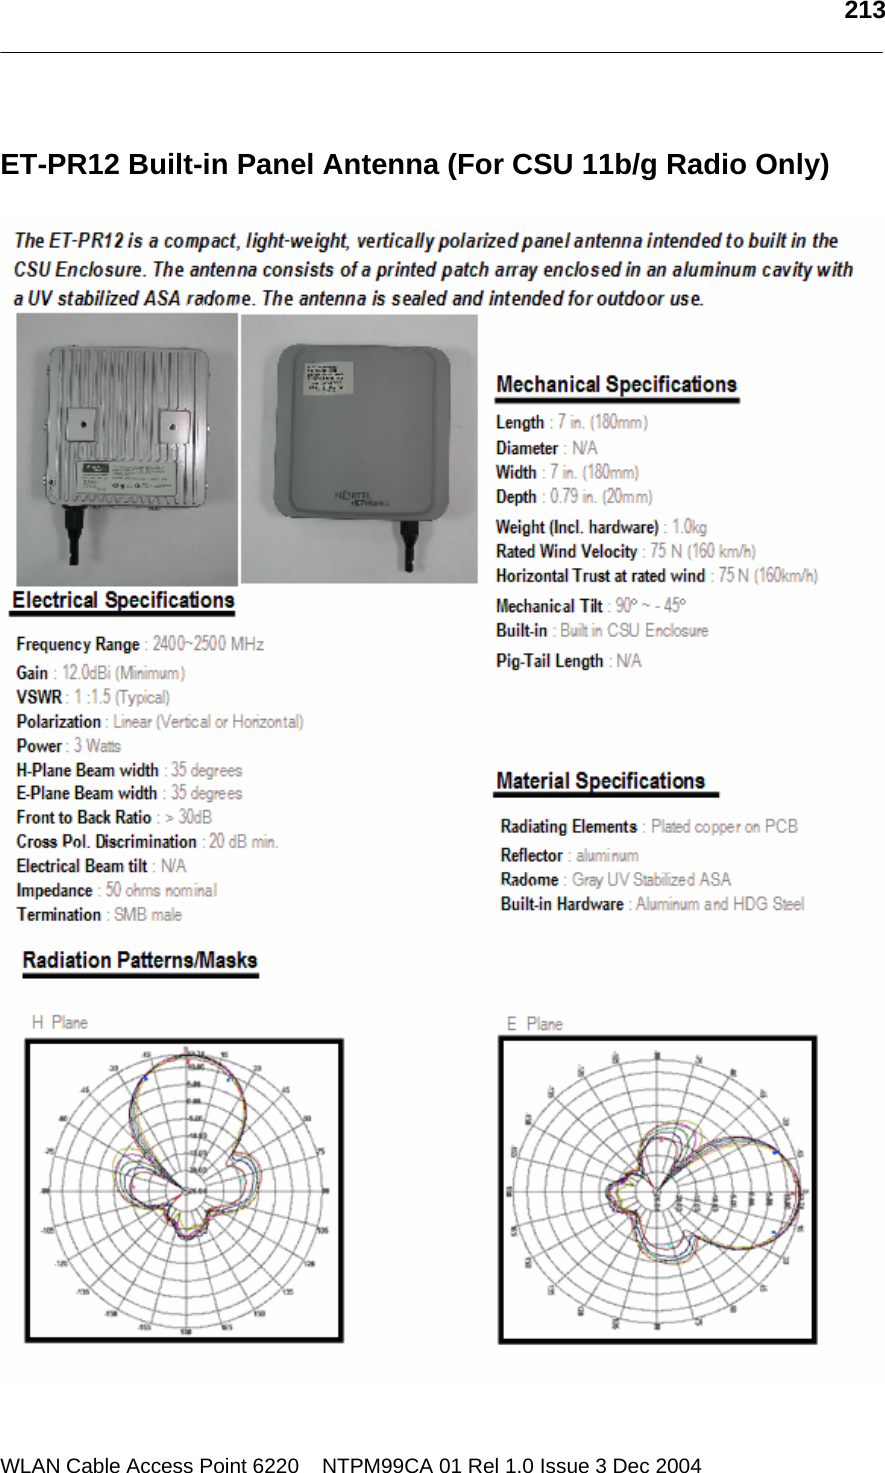   213  WLAN Cable Access Point 6220    NTPM99CA 01 Rel 1.0 Issue 3 Dec 2004  ET-PR12 Built-in Panel Antenna (For CSU 11b/g Radio Only)   